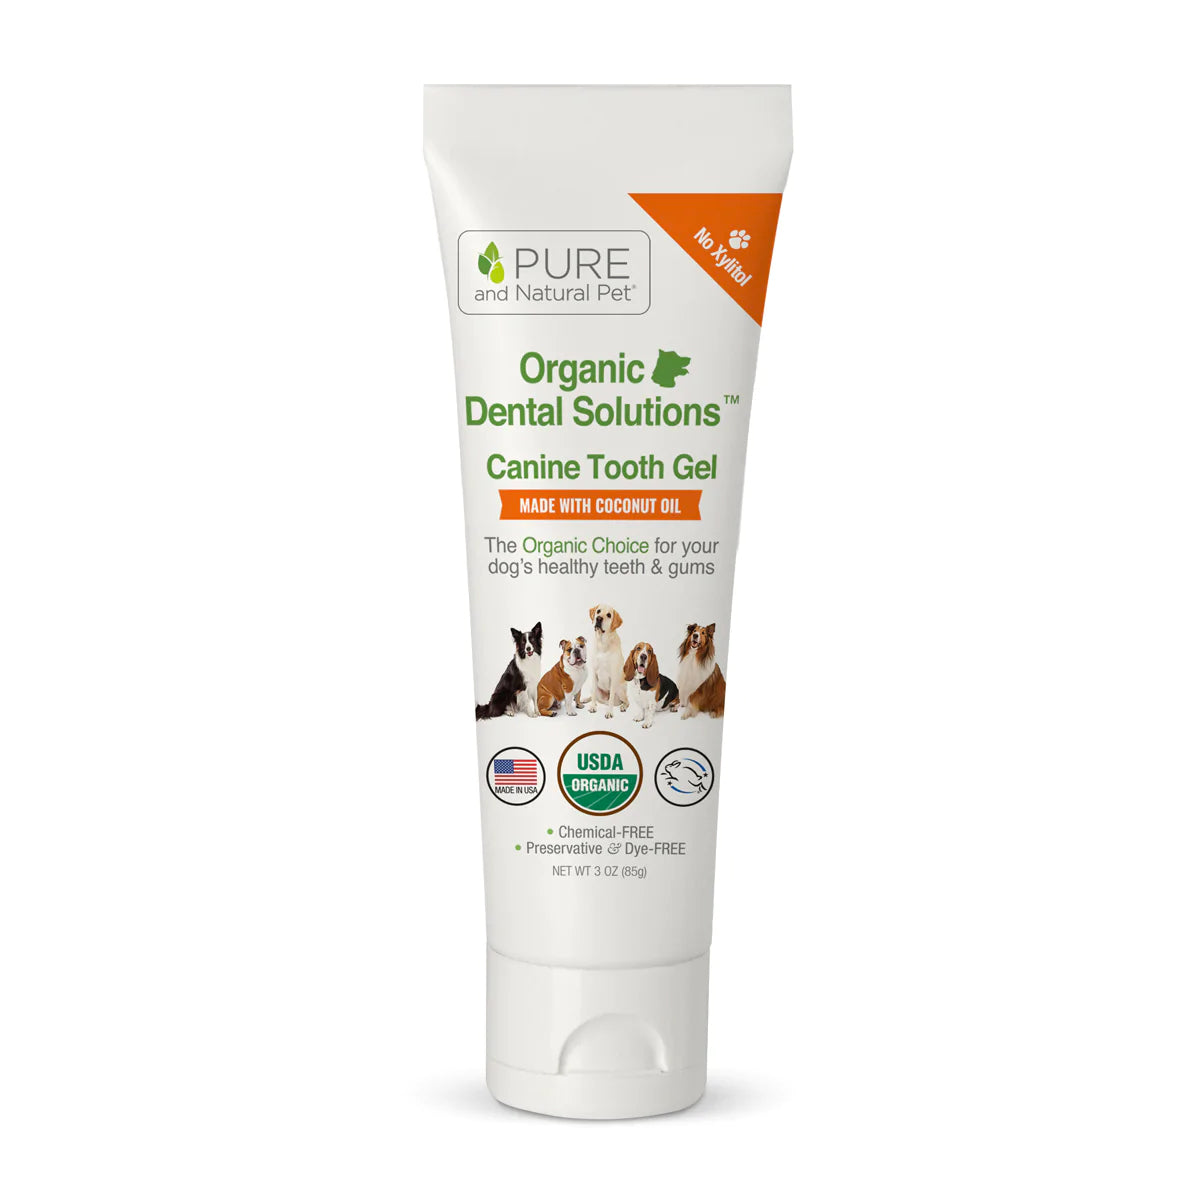 Pure and Natural Pet Organic Dental Solutions Canine Tooth Gel  Image